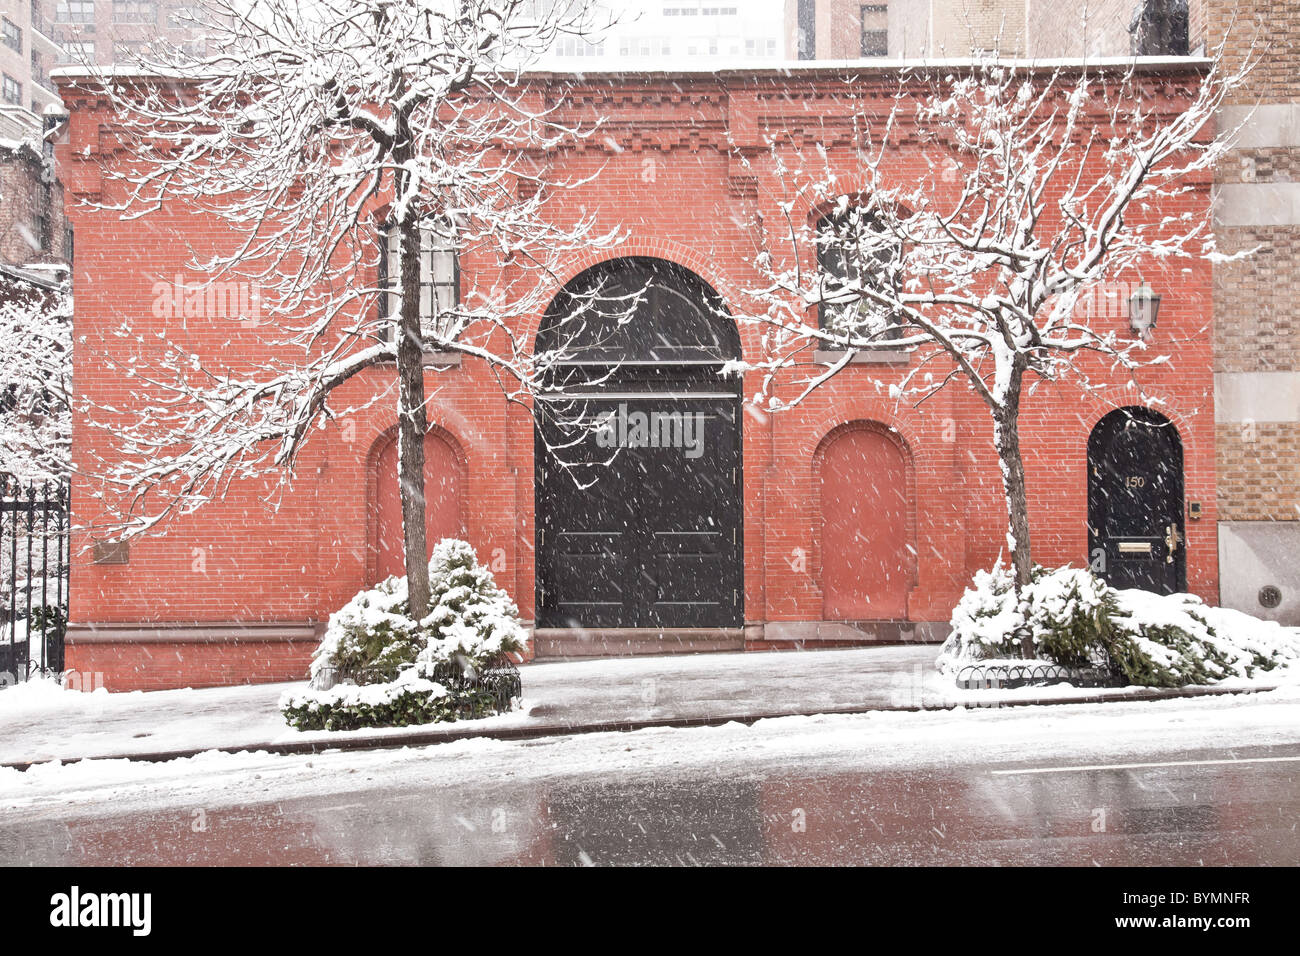 Amateur Comedy Club Building, Snow Storm, Murray Hill, Midtown, NYC, east 36th street Banque D'Images